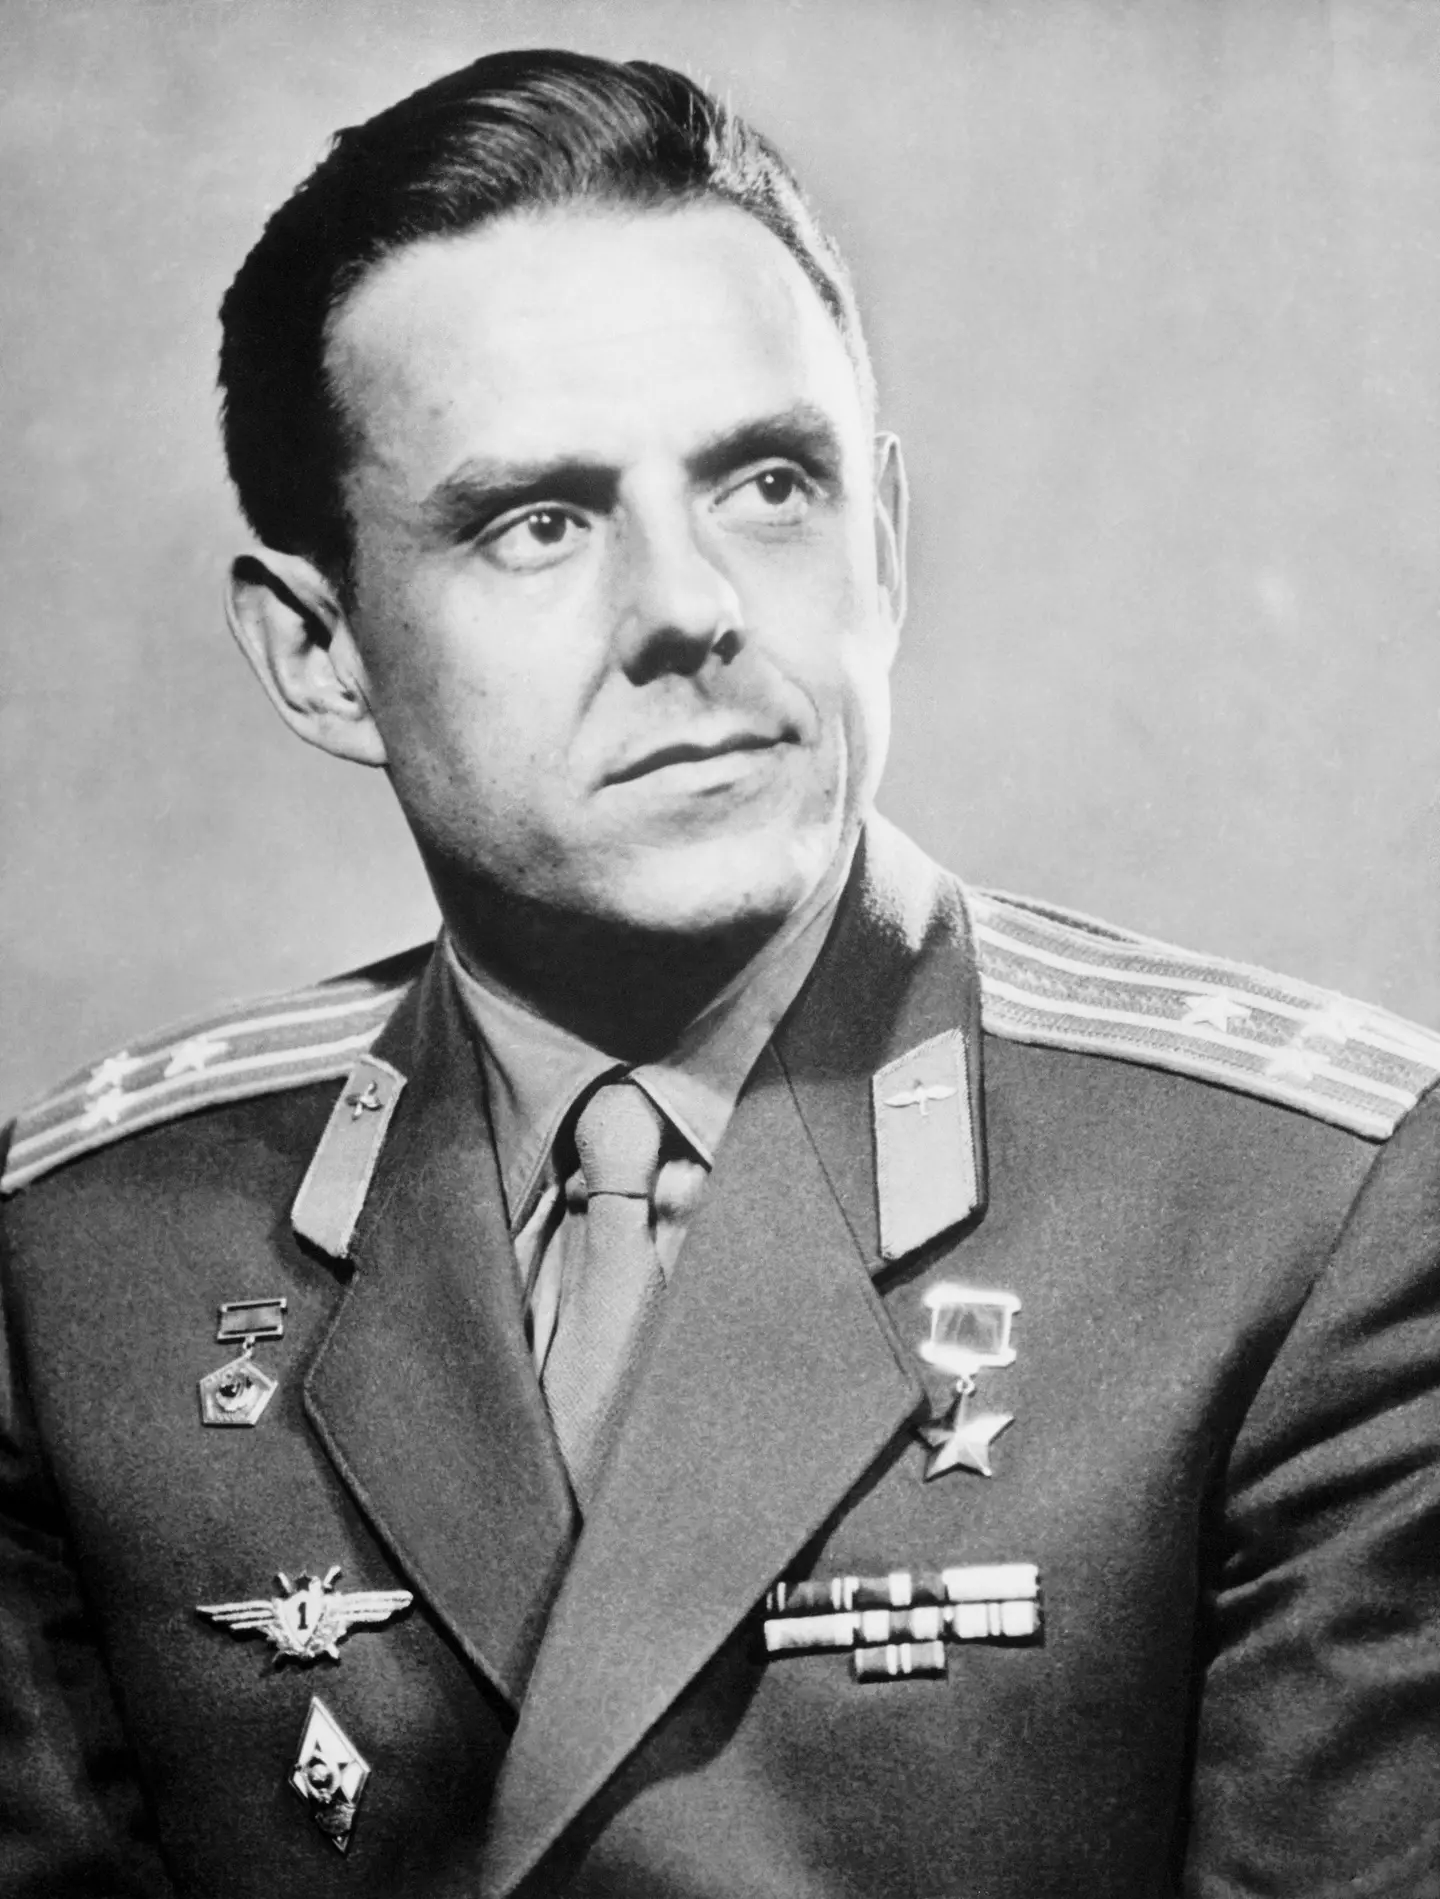 Vladimir Komarov piloted the Soyuz 1, which was supposed to orbit the earth but crashed to the ground, killing him.